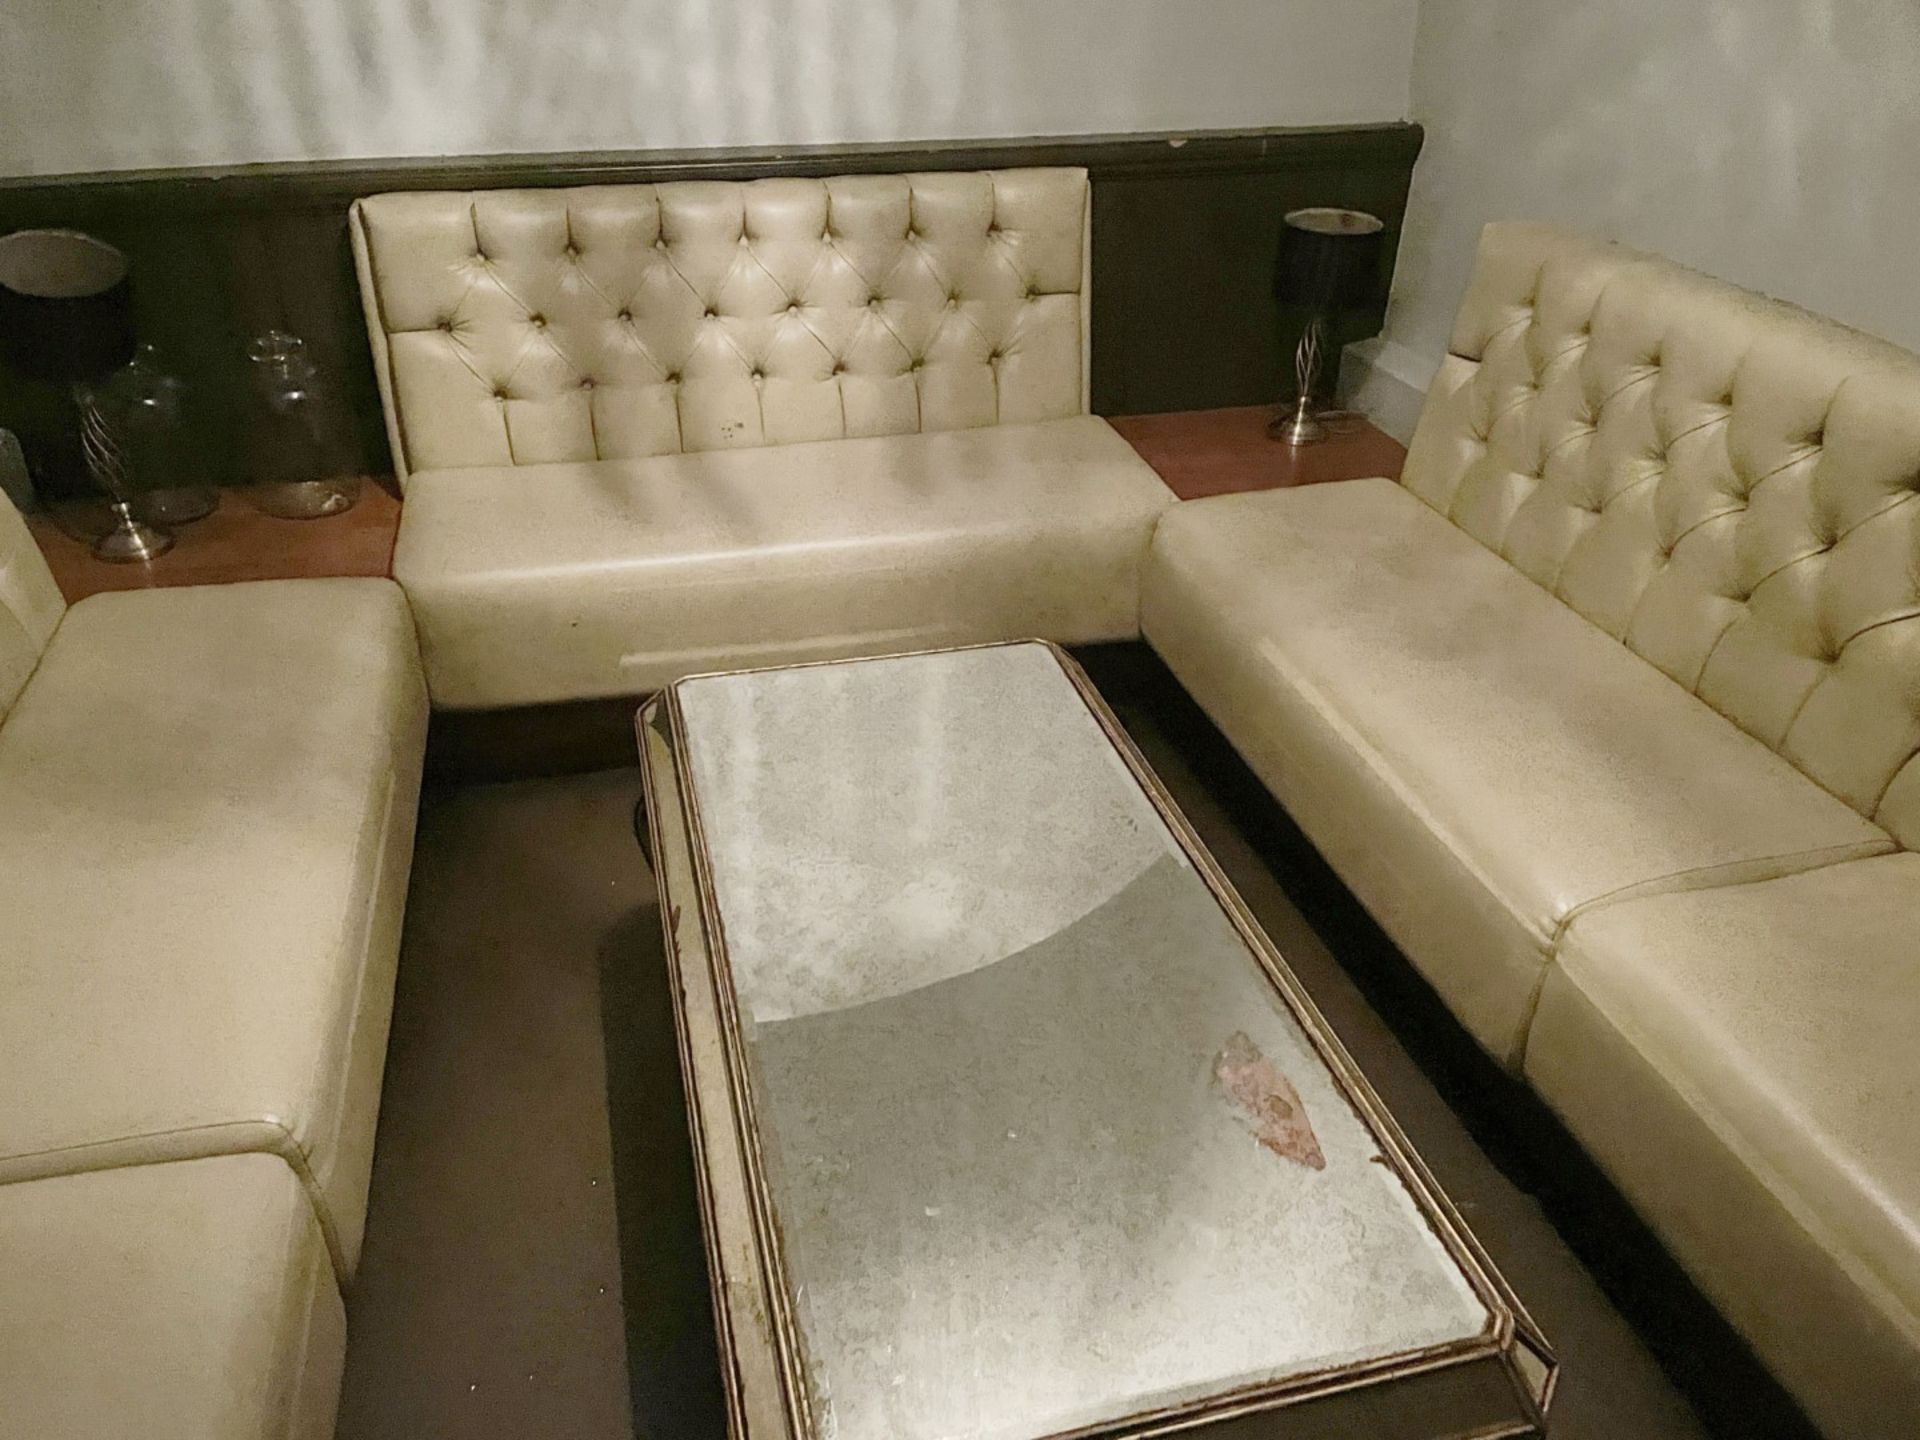 5 x Sections of Commercial Button Back Banquette Booth Seating Upholstered in a Cream Faux Leather - Image 8 of 14